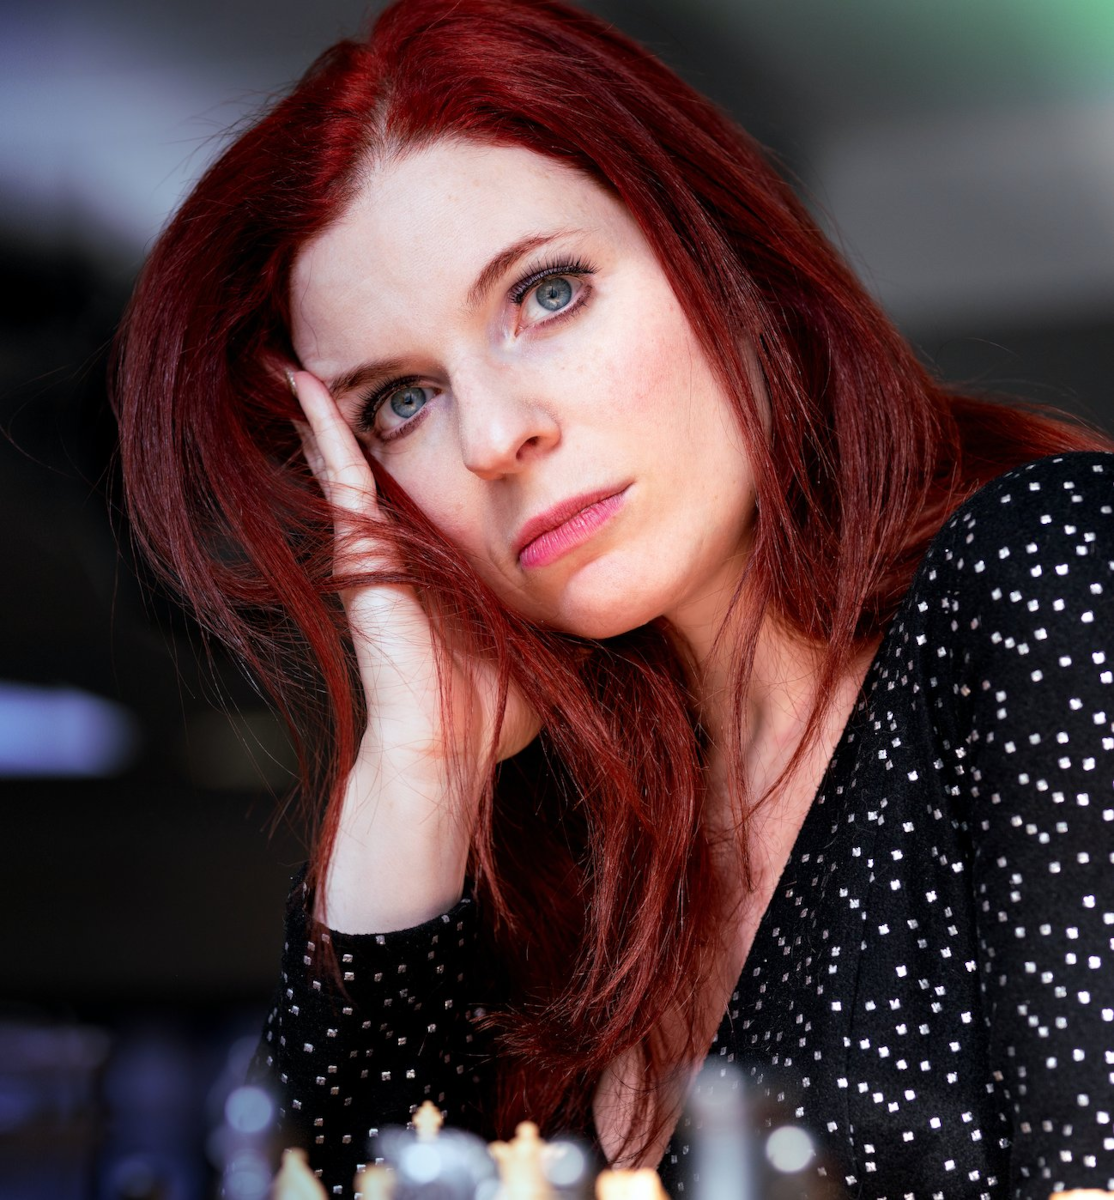 Author headshot of Poker & Chess phenom Jennifer Shahade, who signed two-book deal to write about being a top female chess player . She has straight dark red hair, serious blue eyes, and is wearing a black top with a pattern of small white squares. 